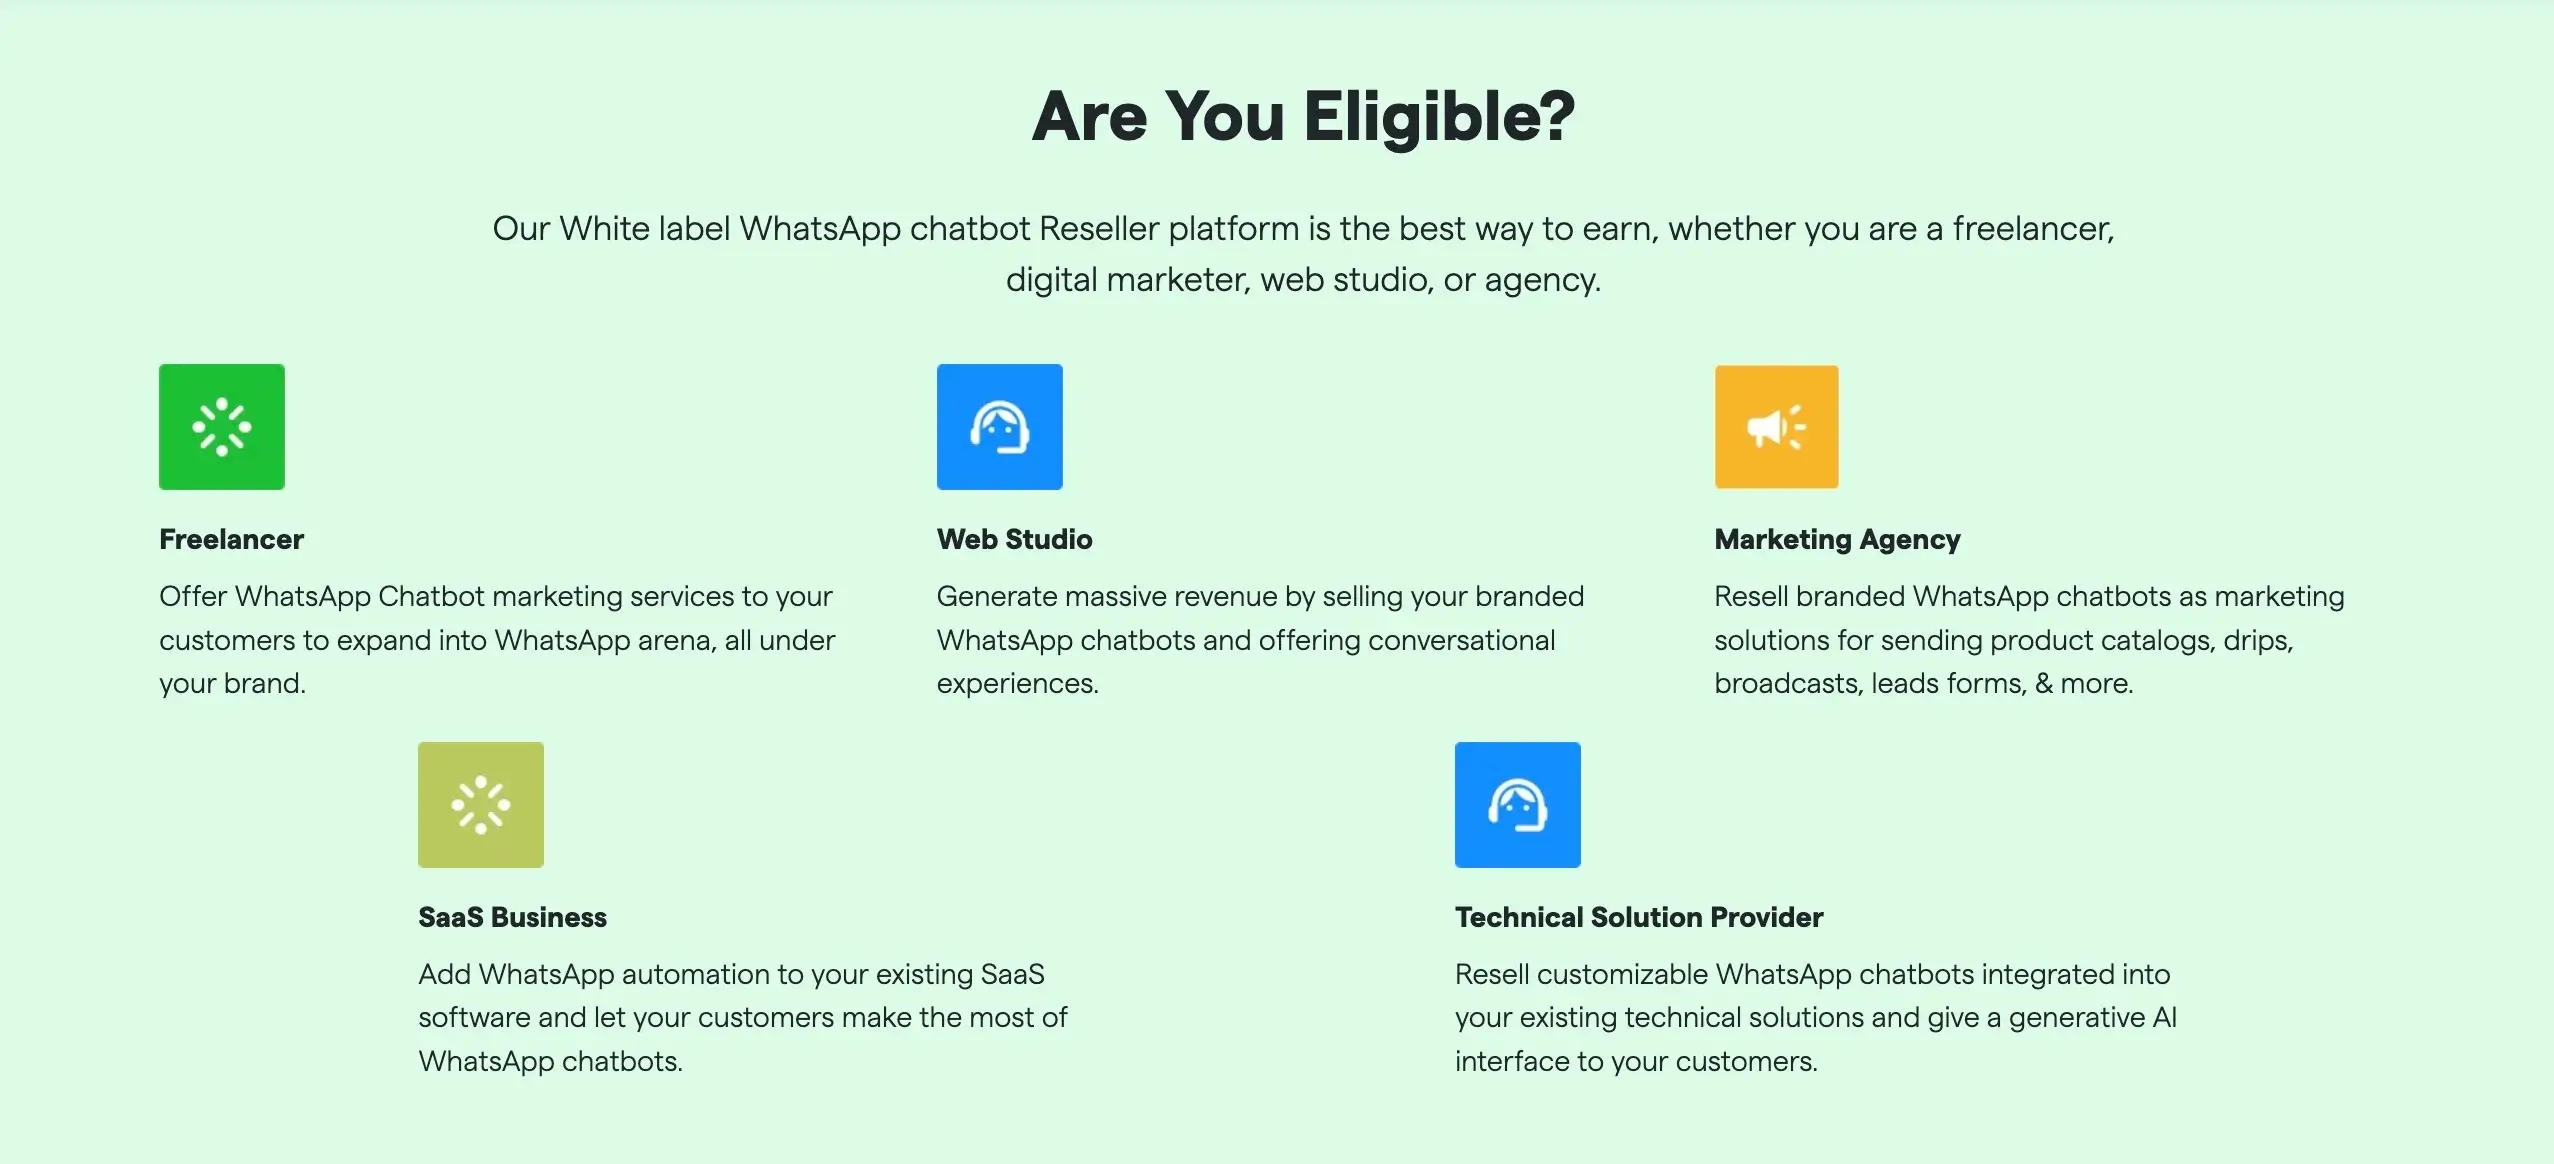 Who Can become WhatsApp Whitelabel Chatbot Reseller